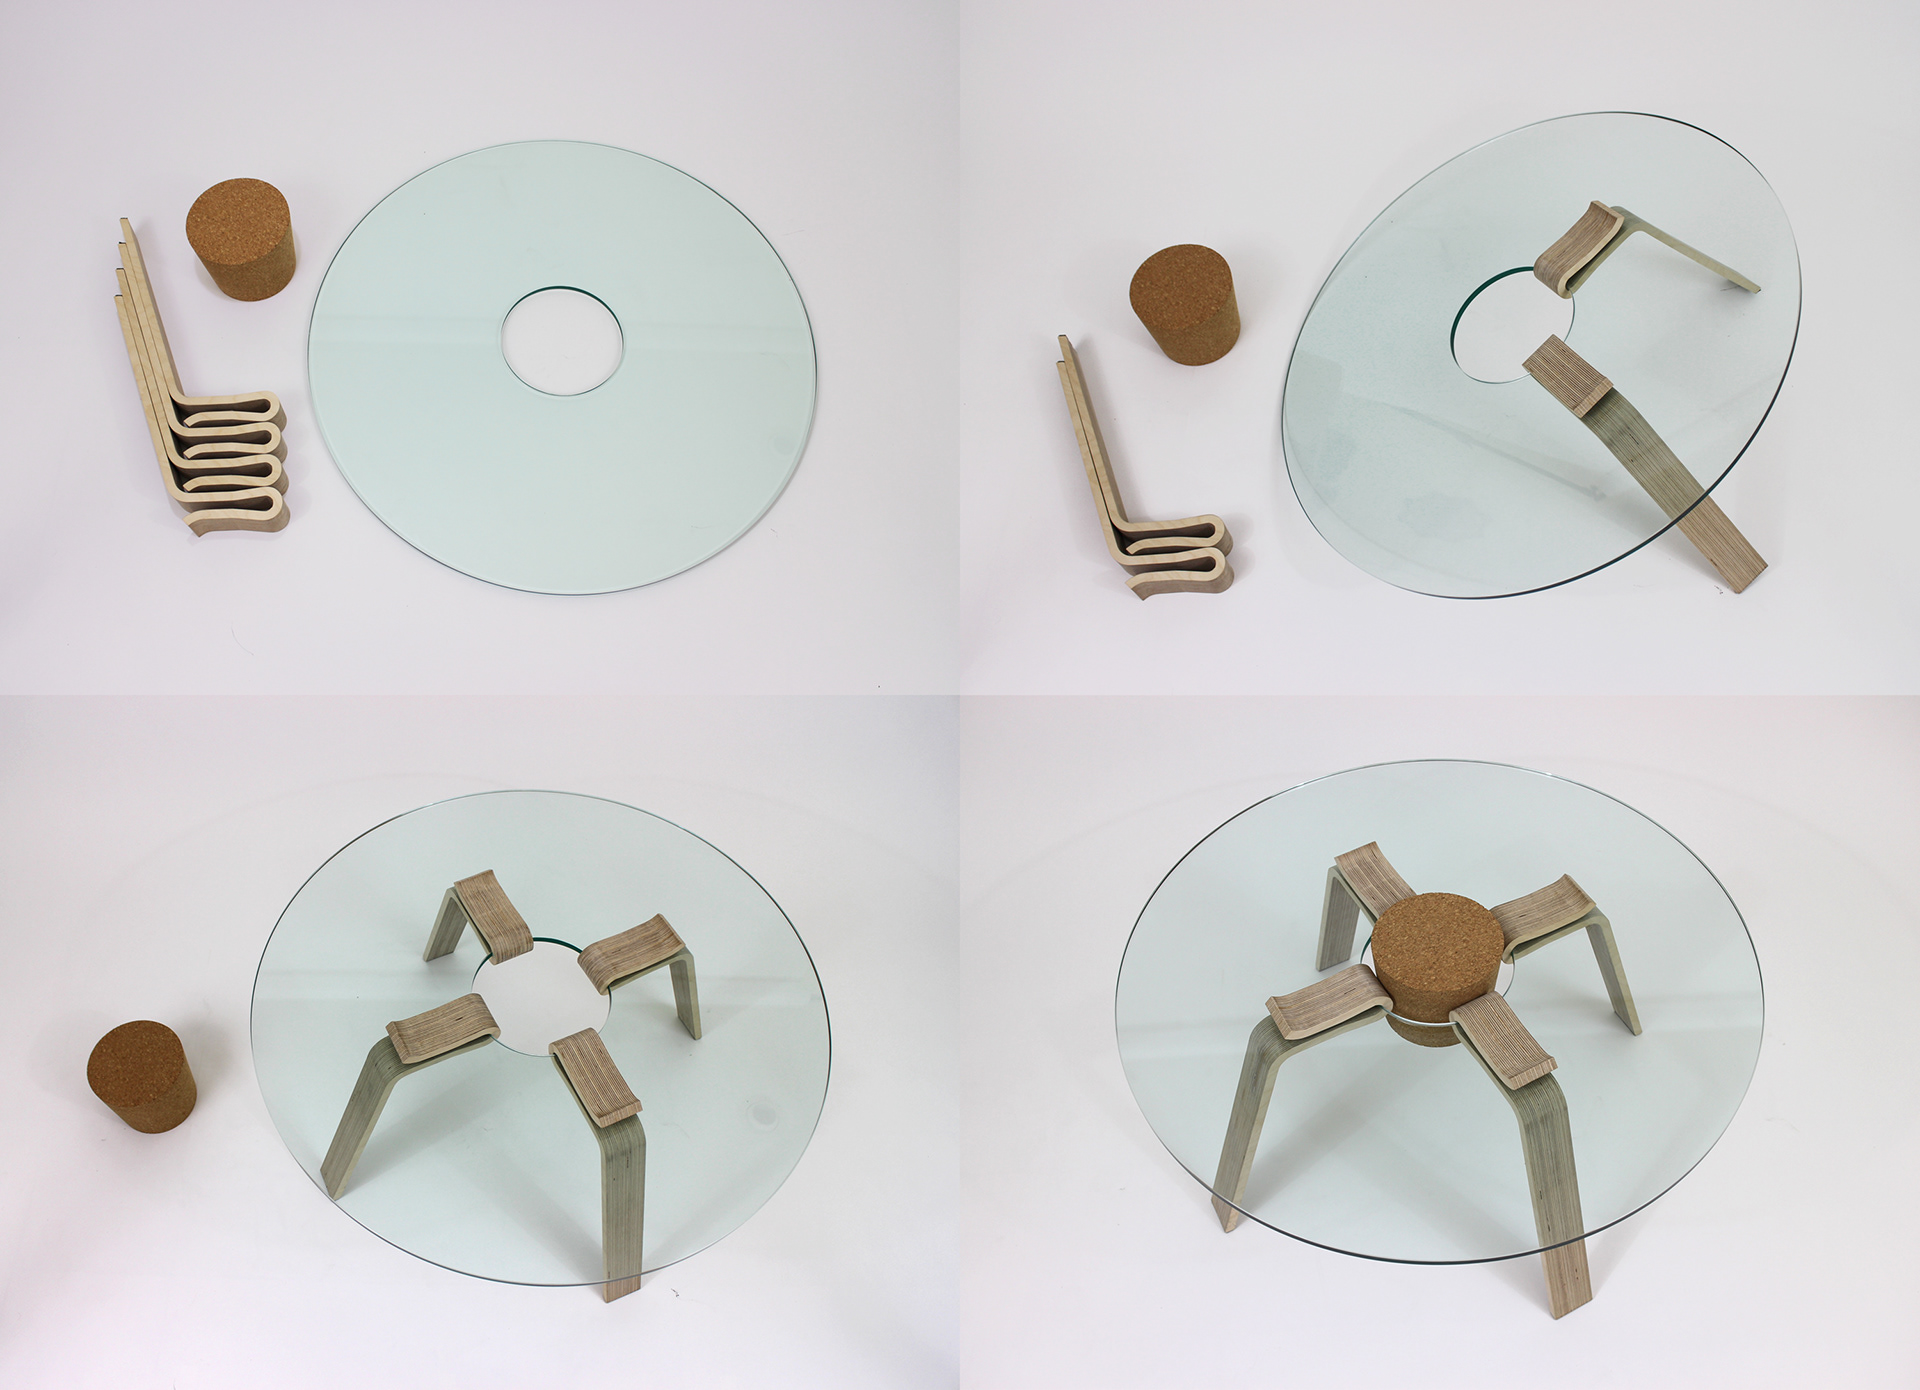 components of the cork stopper table